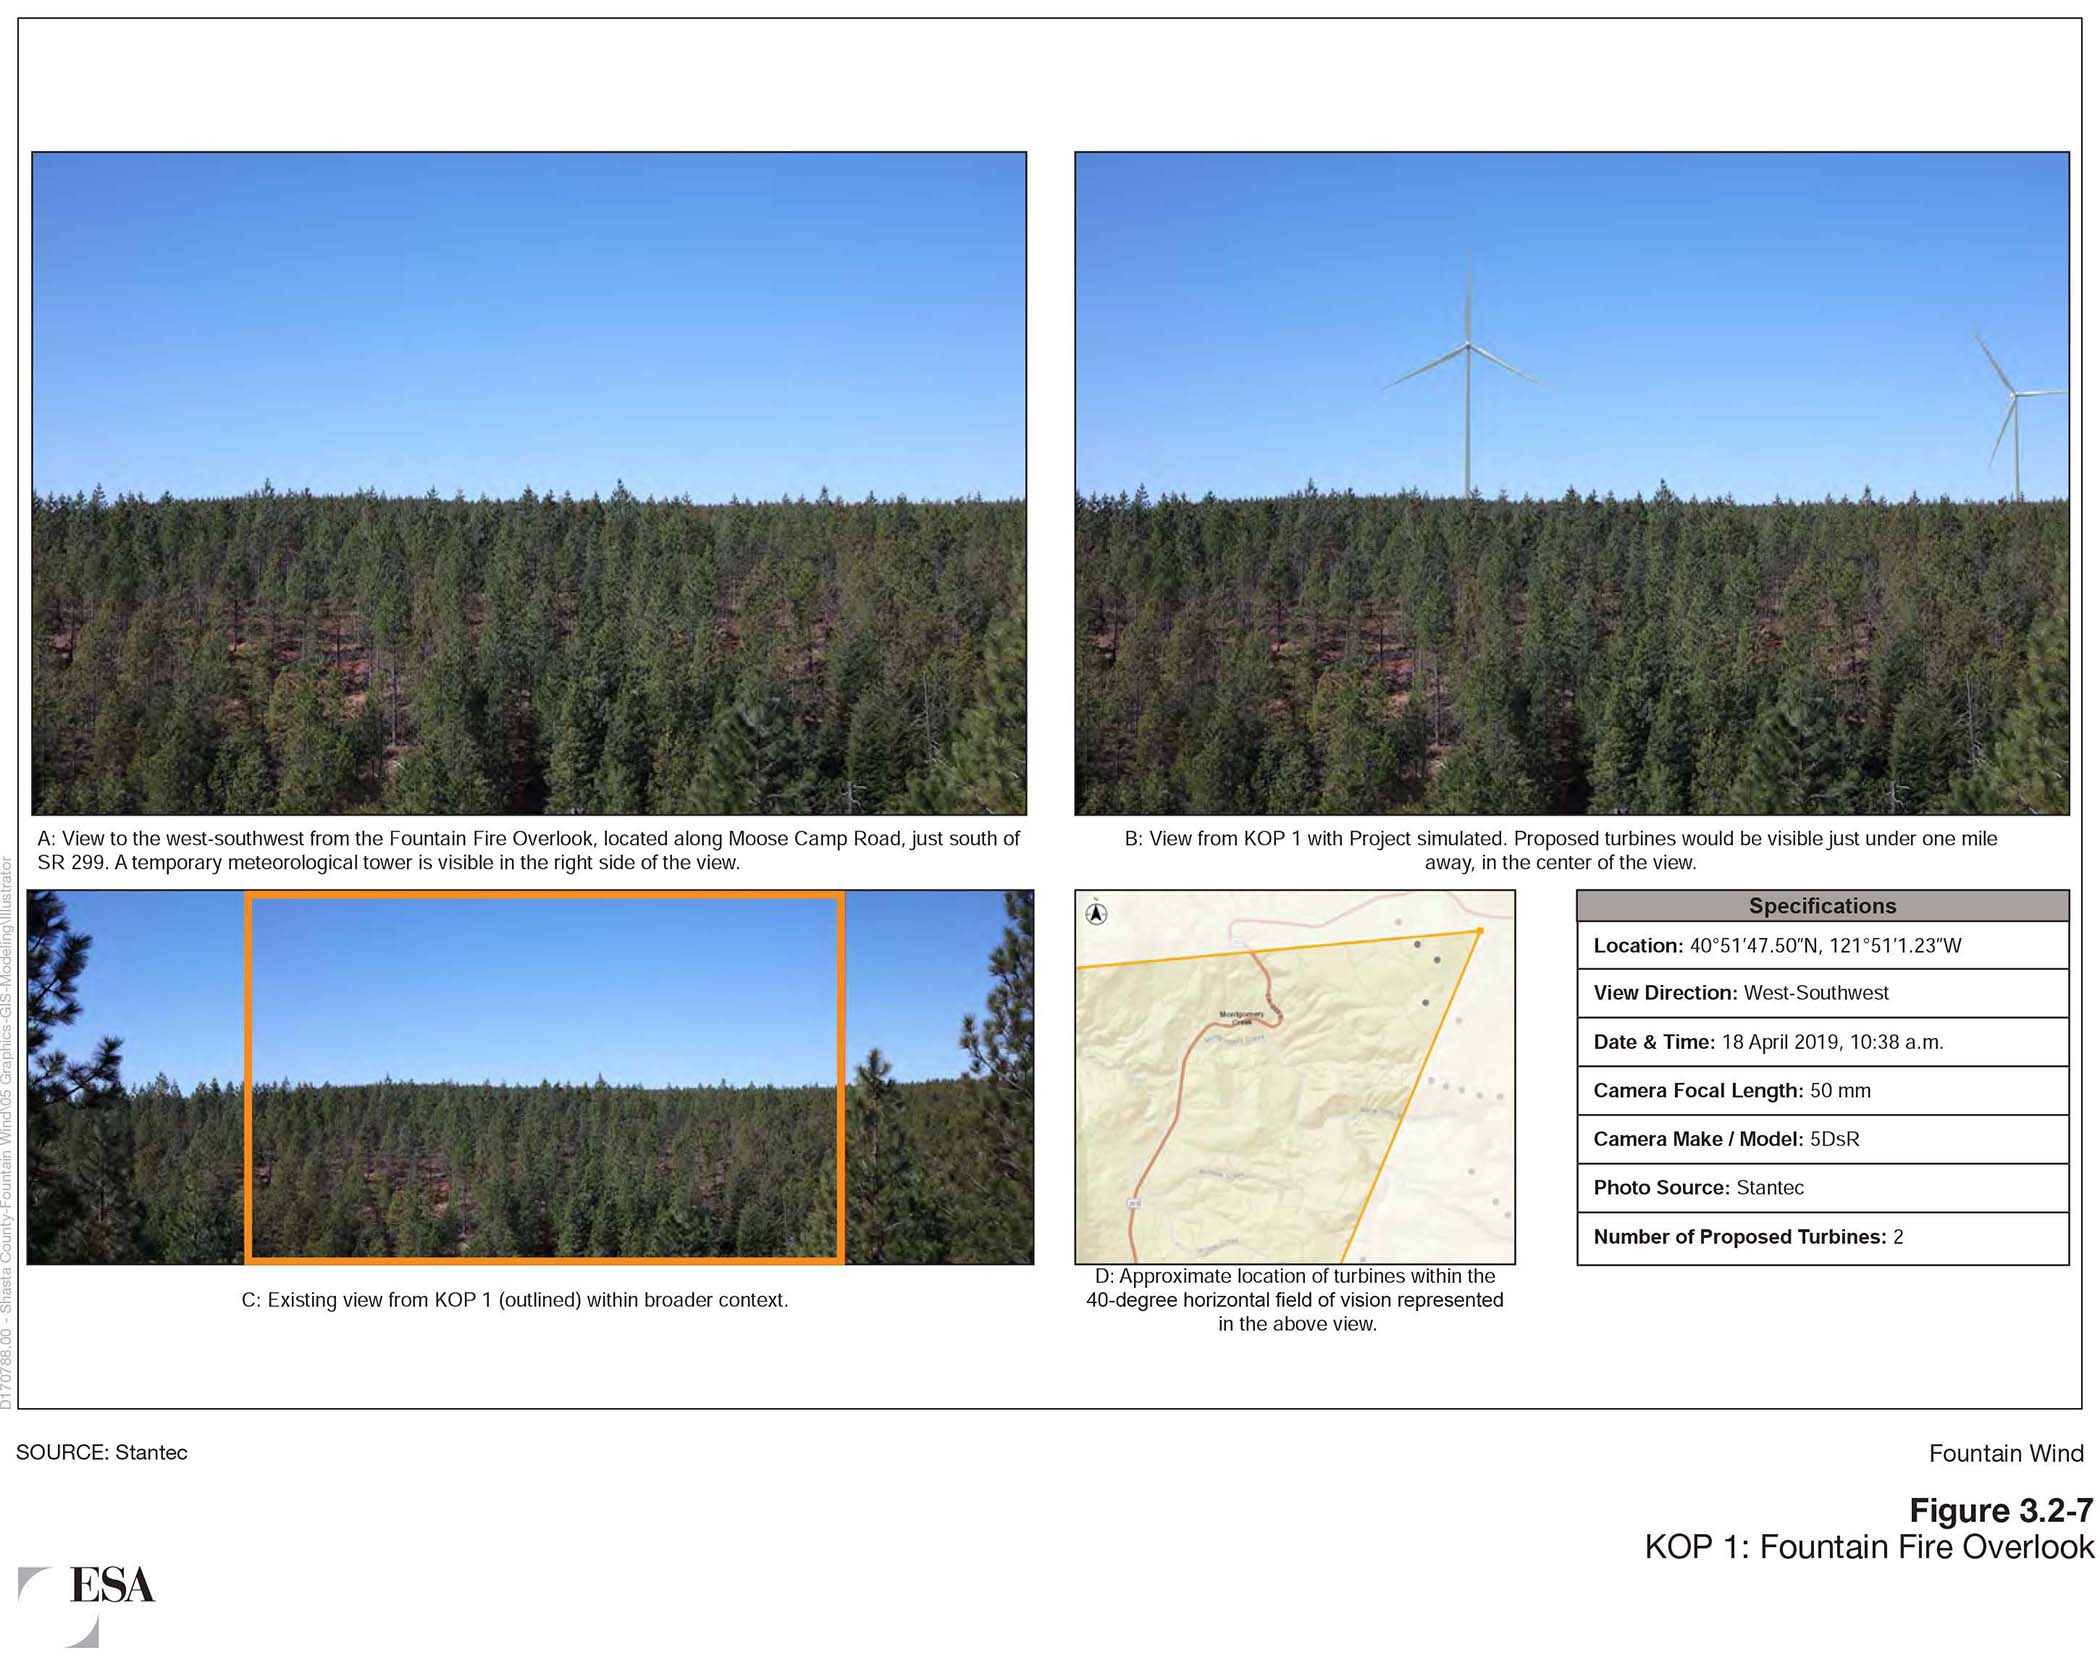 Fountain Fire Overlook (Moose Camp Road, South of SR299) - OVERVIEW